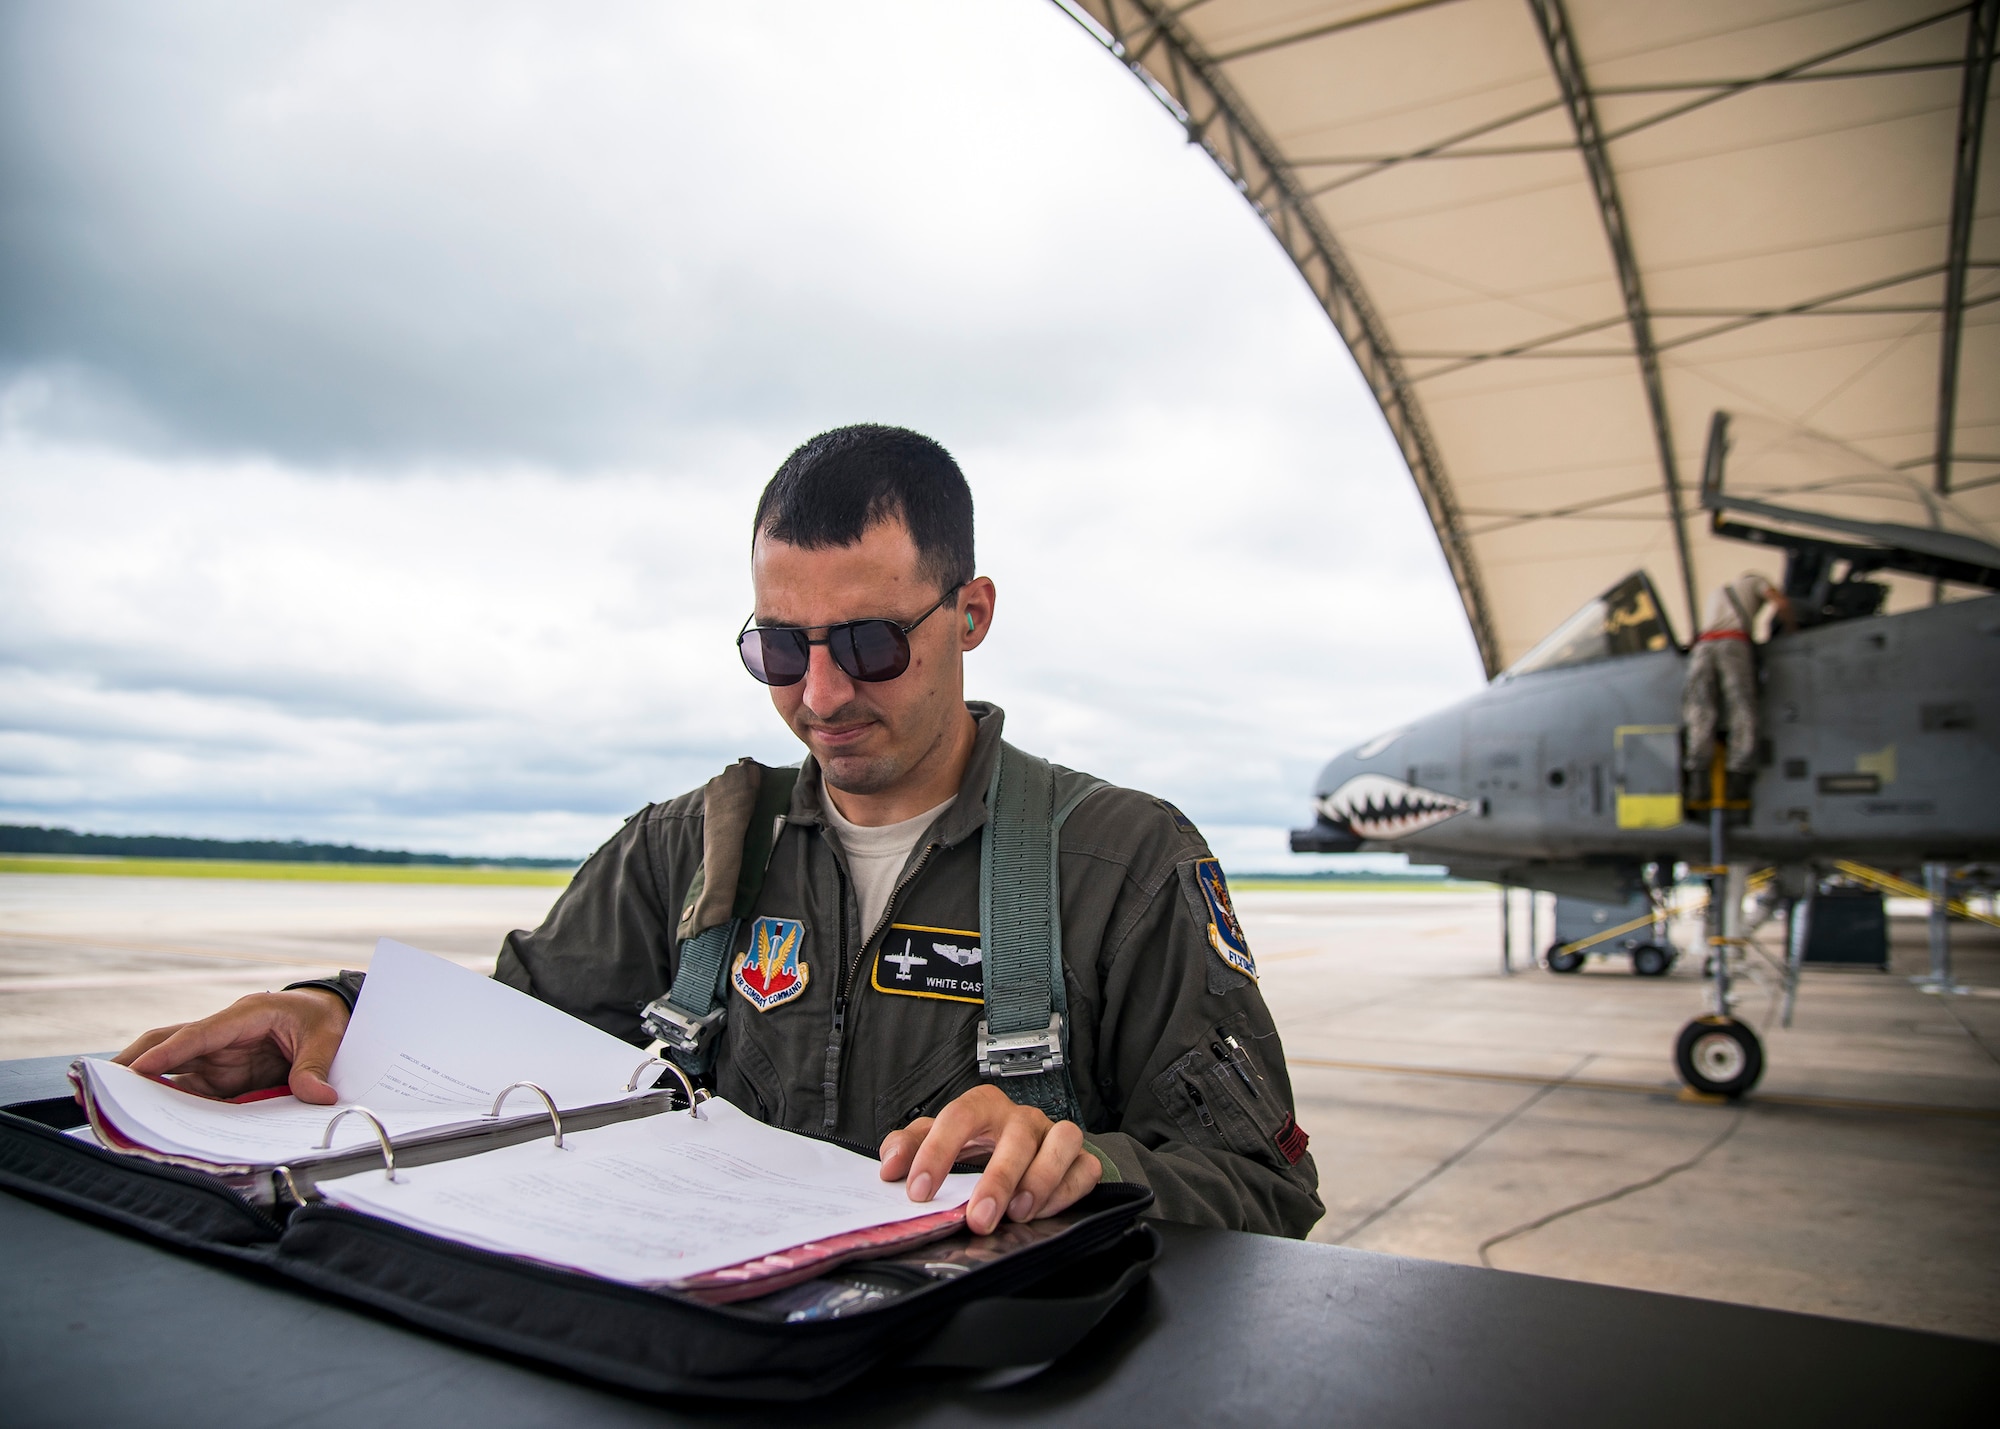 Capt. Nicklas Castle, 75th Fighter Squadron A-10C Thunderbolt II pilot, reads a flight plan during a sortie surge exercise, July 24, 2019, at Moody Air Force Base, Ga. The exercise was conducted to determine Airmen's abilities to perform effectively while generating combat or training sorties at an accelerated rate. Throughout the four-day surge, pilots and maintainers completed 131 sorties spanning approximately 152 flying hours. (U.S. Air Force photo by Airman 1st Class Eugene Oliver)